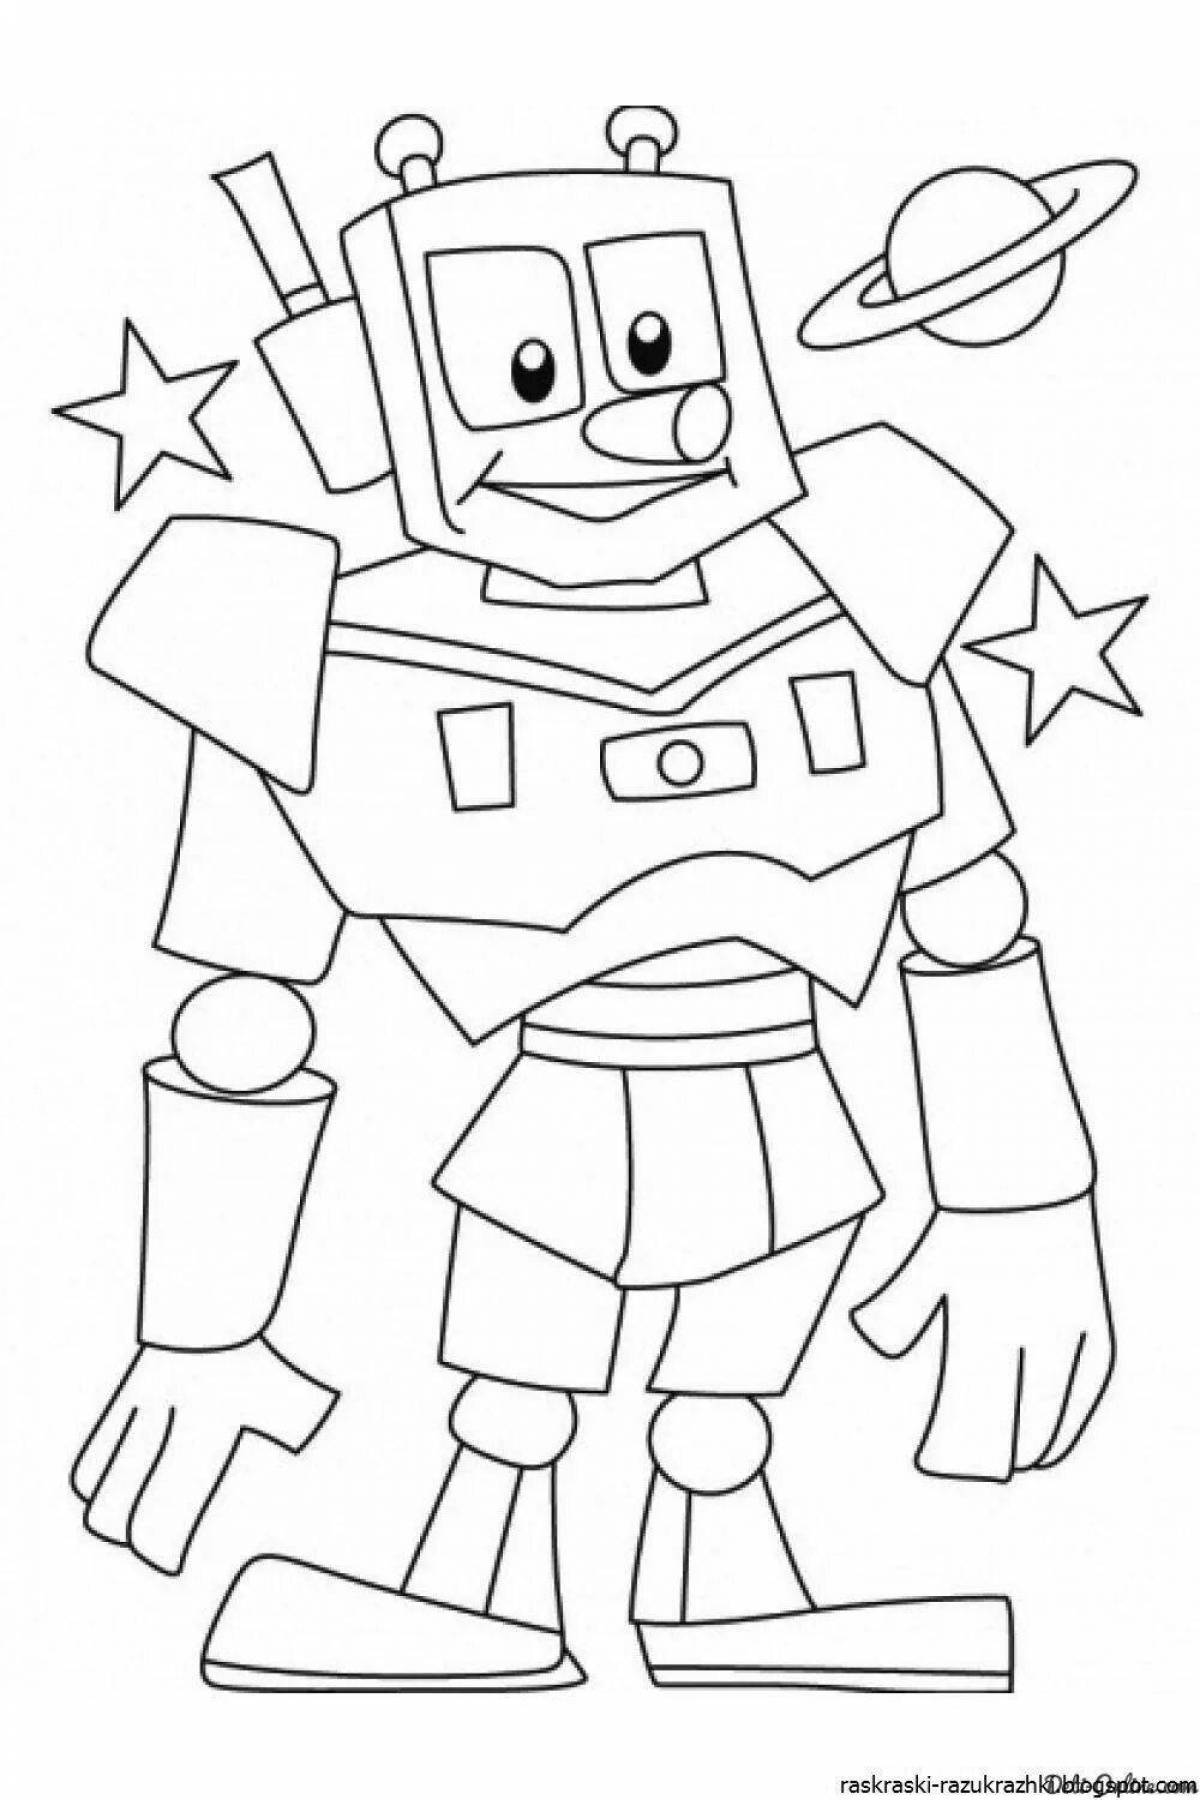 Vibrant robot coloring page for kids